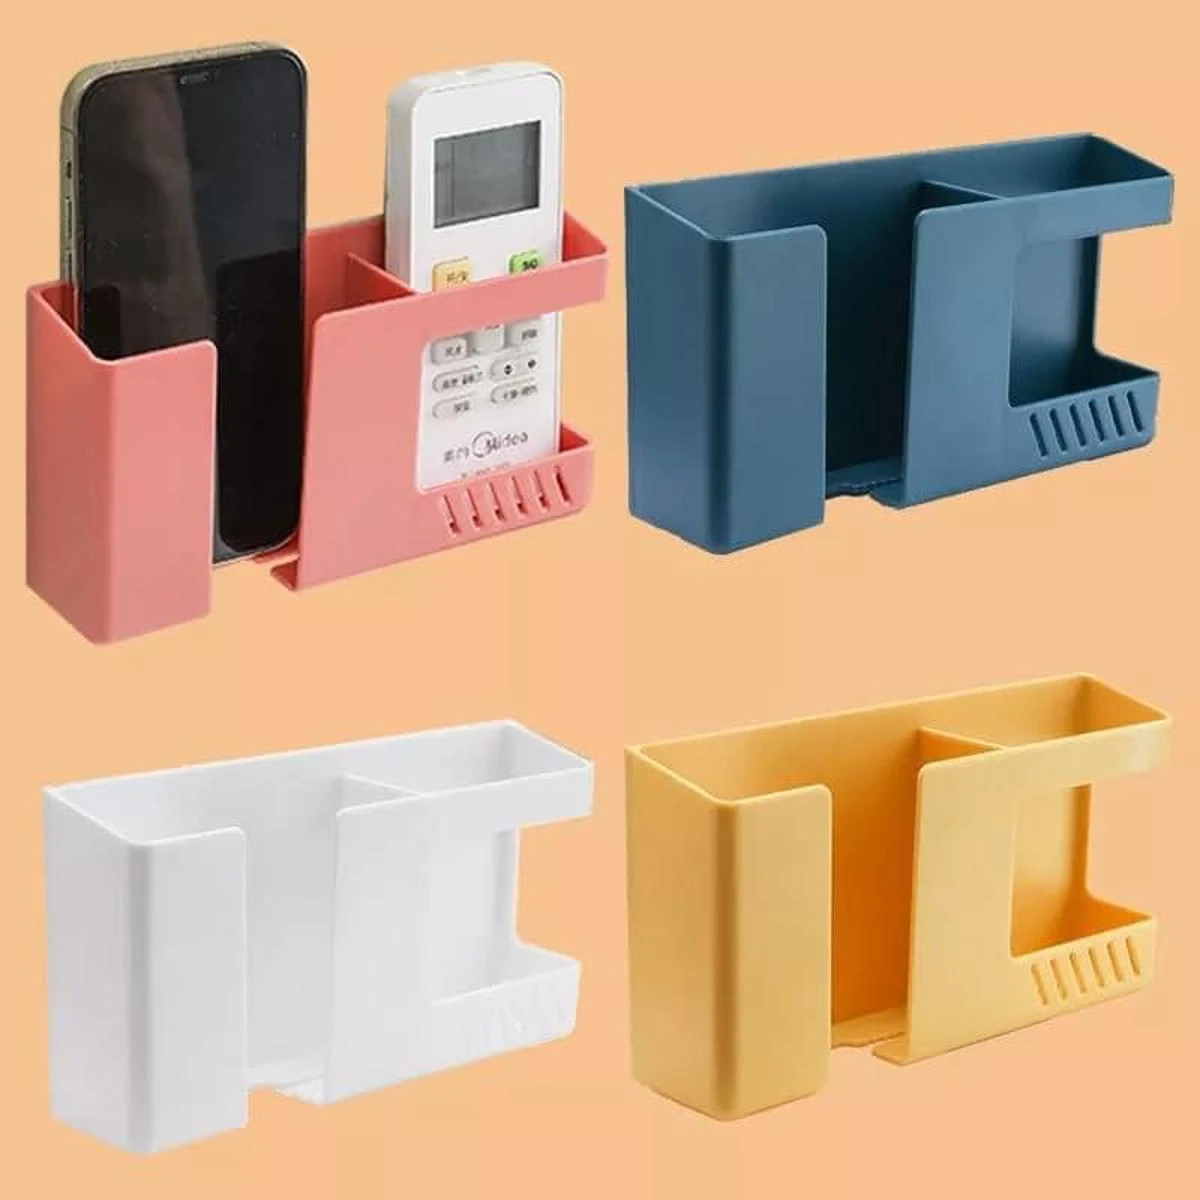 Wall-Mounted 2-In-1 Mobile Phone Charging Stand Multifountion Storage Holder Bracket